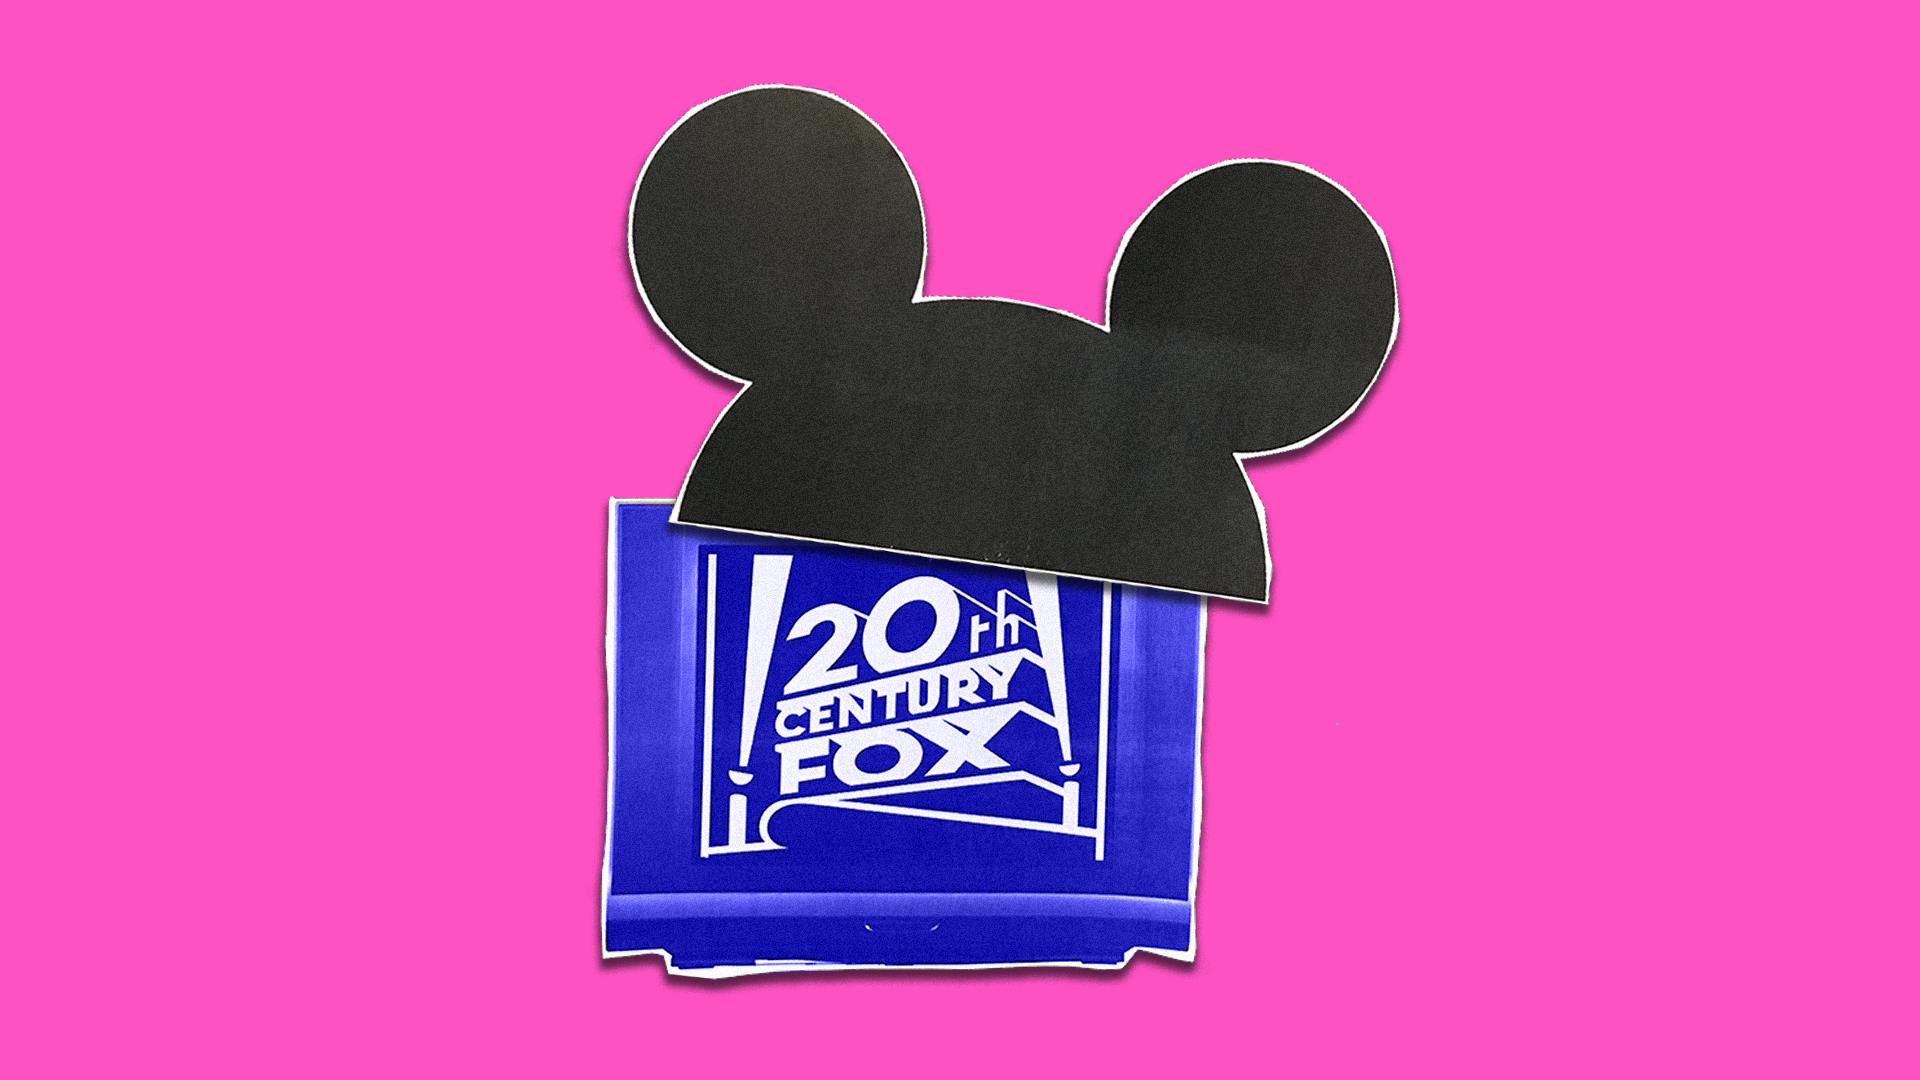 A Mickey Mouse hat on top of a 20th Century Fox logo